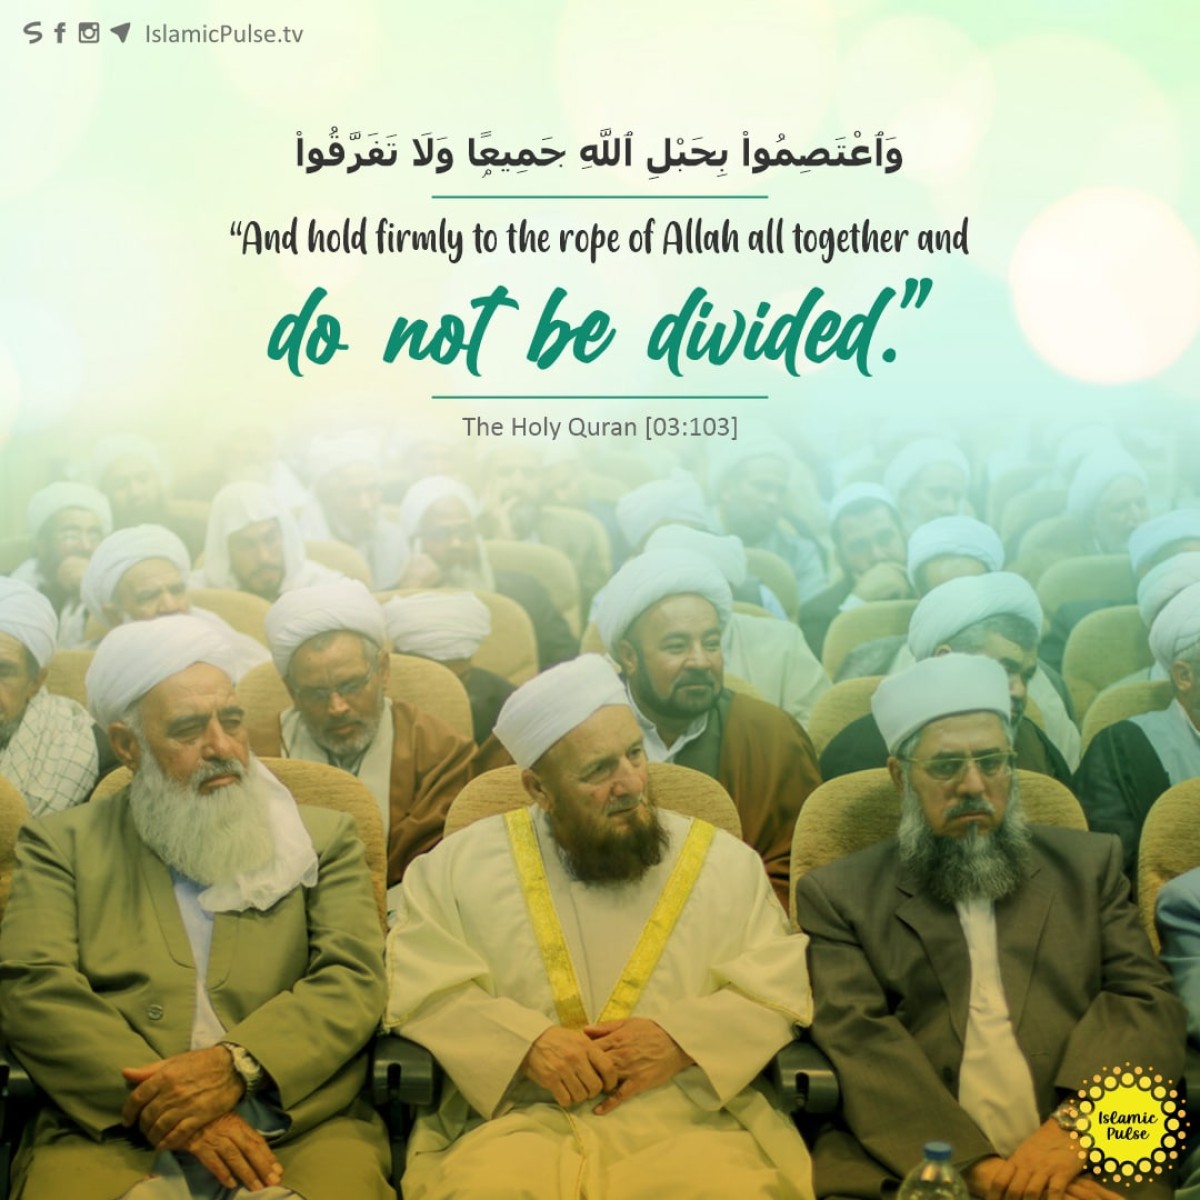 "And hold firmly to the rope of Allah all together and do not be divided."